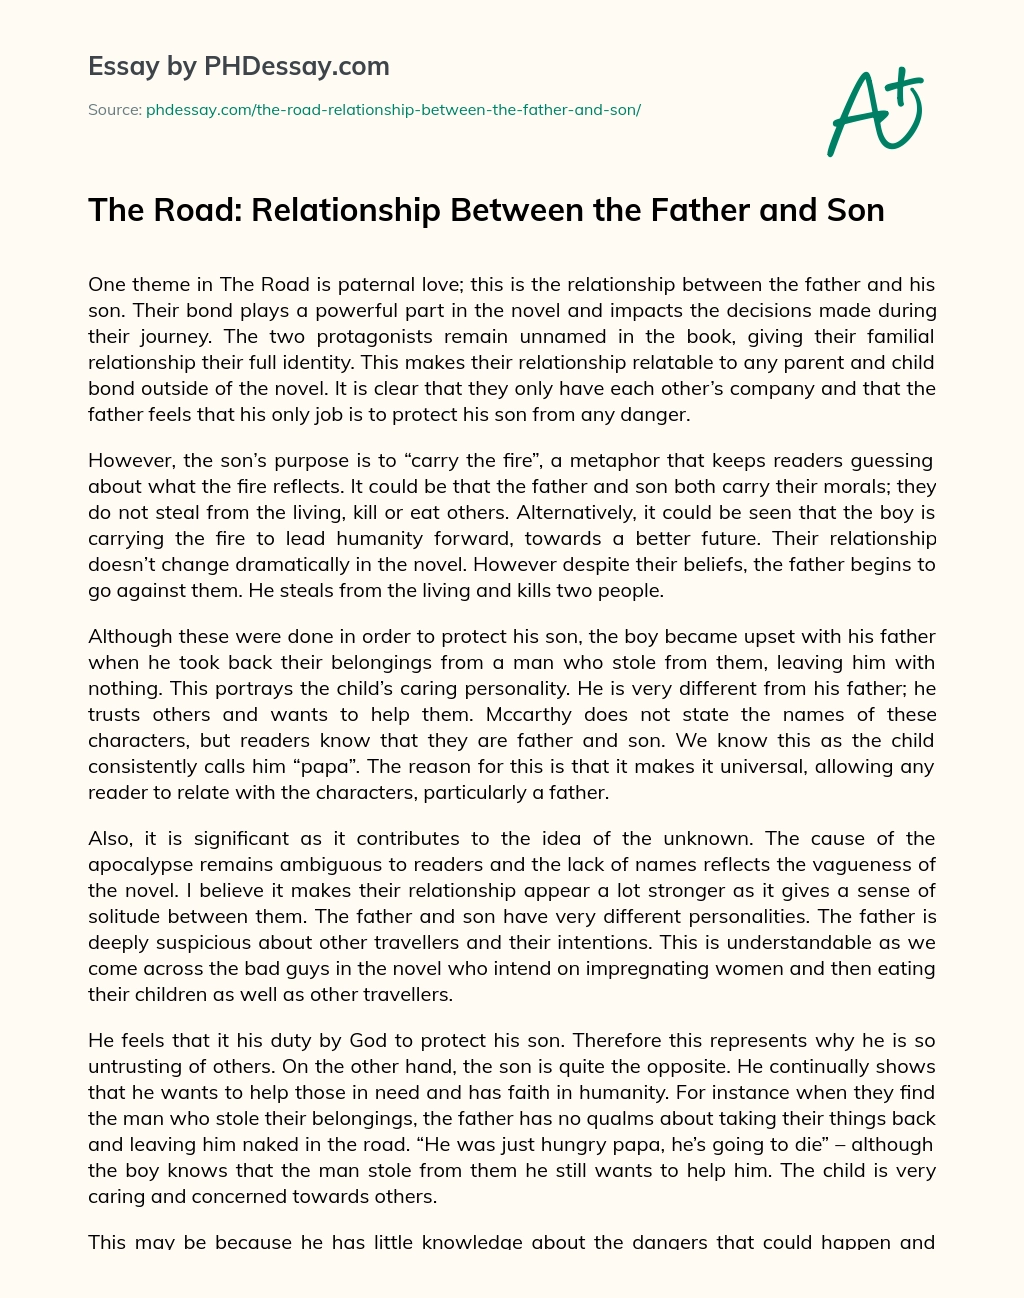 The Road: Relationship Between the Father and Son essay